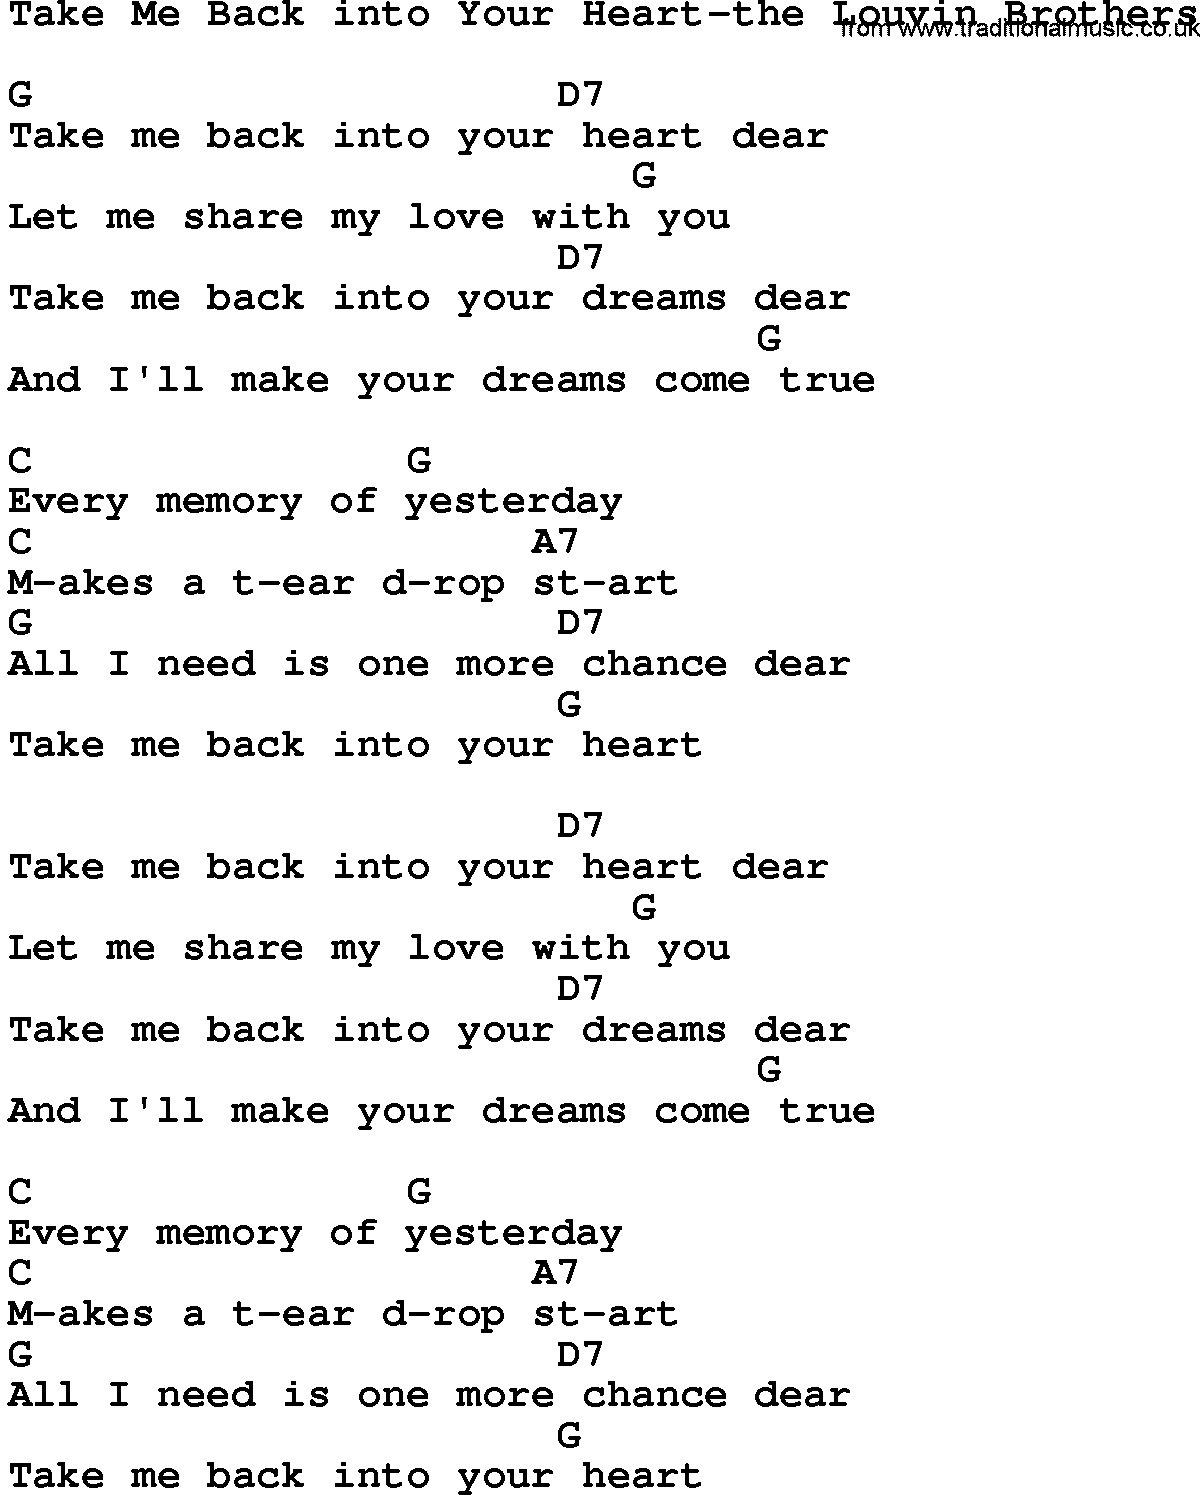 Country music song: Take Me Back Into Your Heart-The Louvin Brothers lyrics and chords